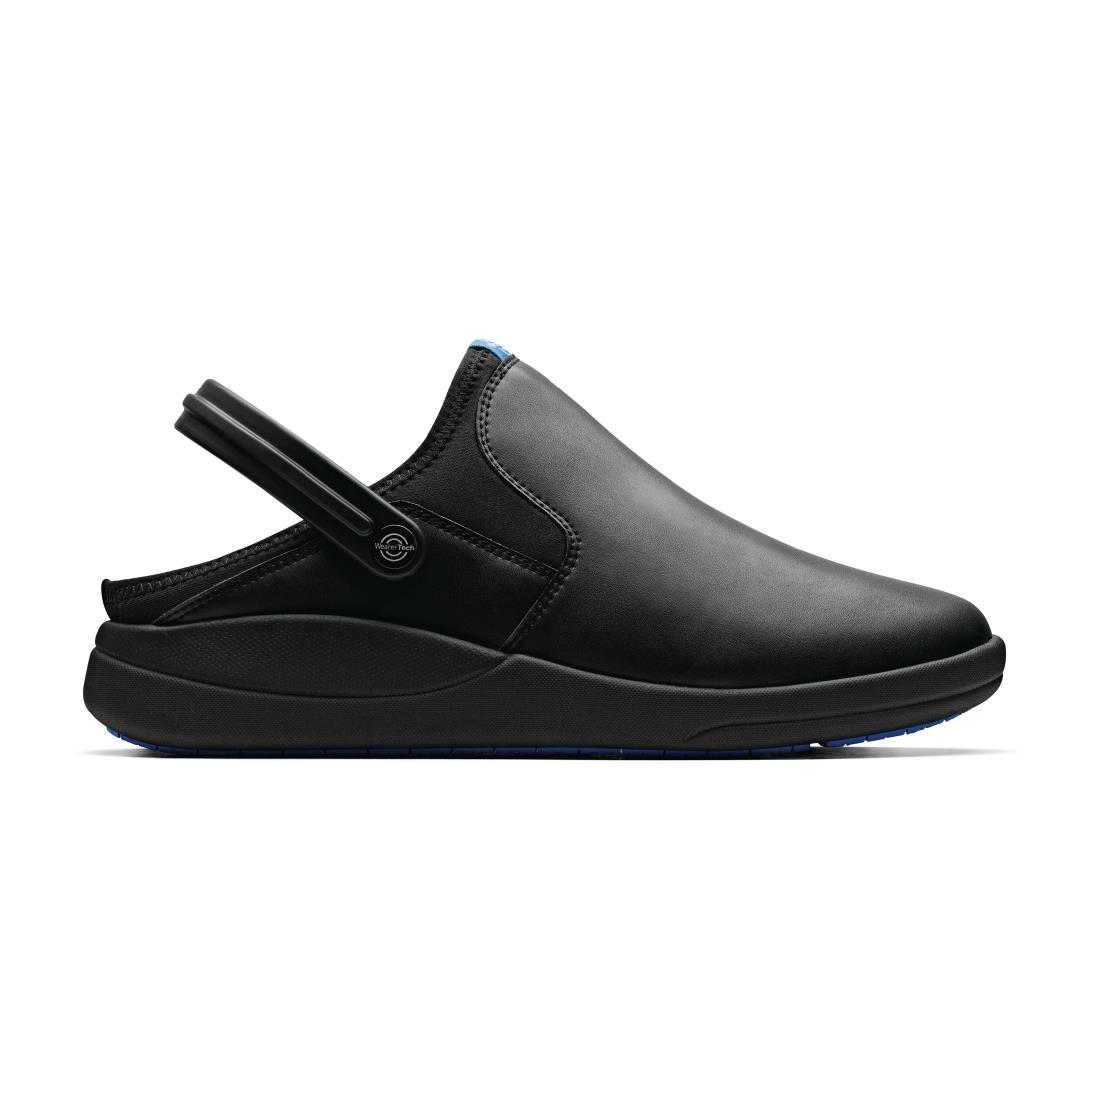 WearerTech Refresh Clog Black with Firm Insoles Size 42 - BB556-8  - 3